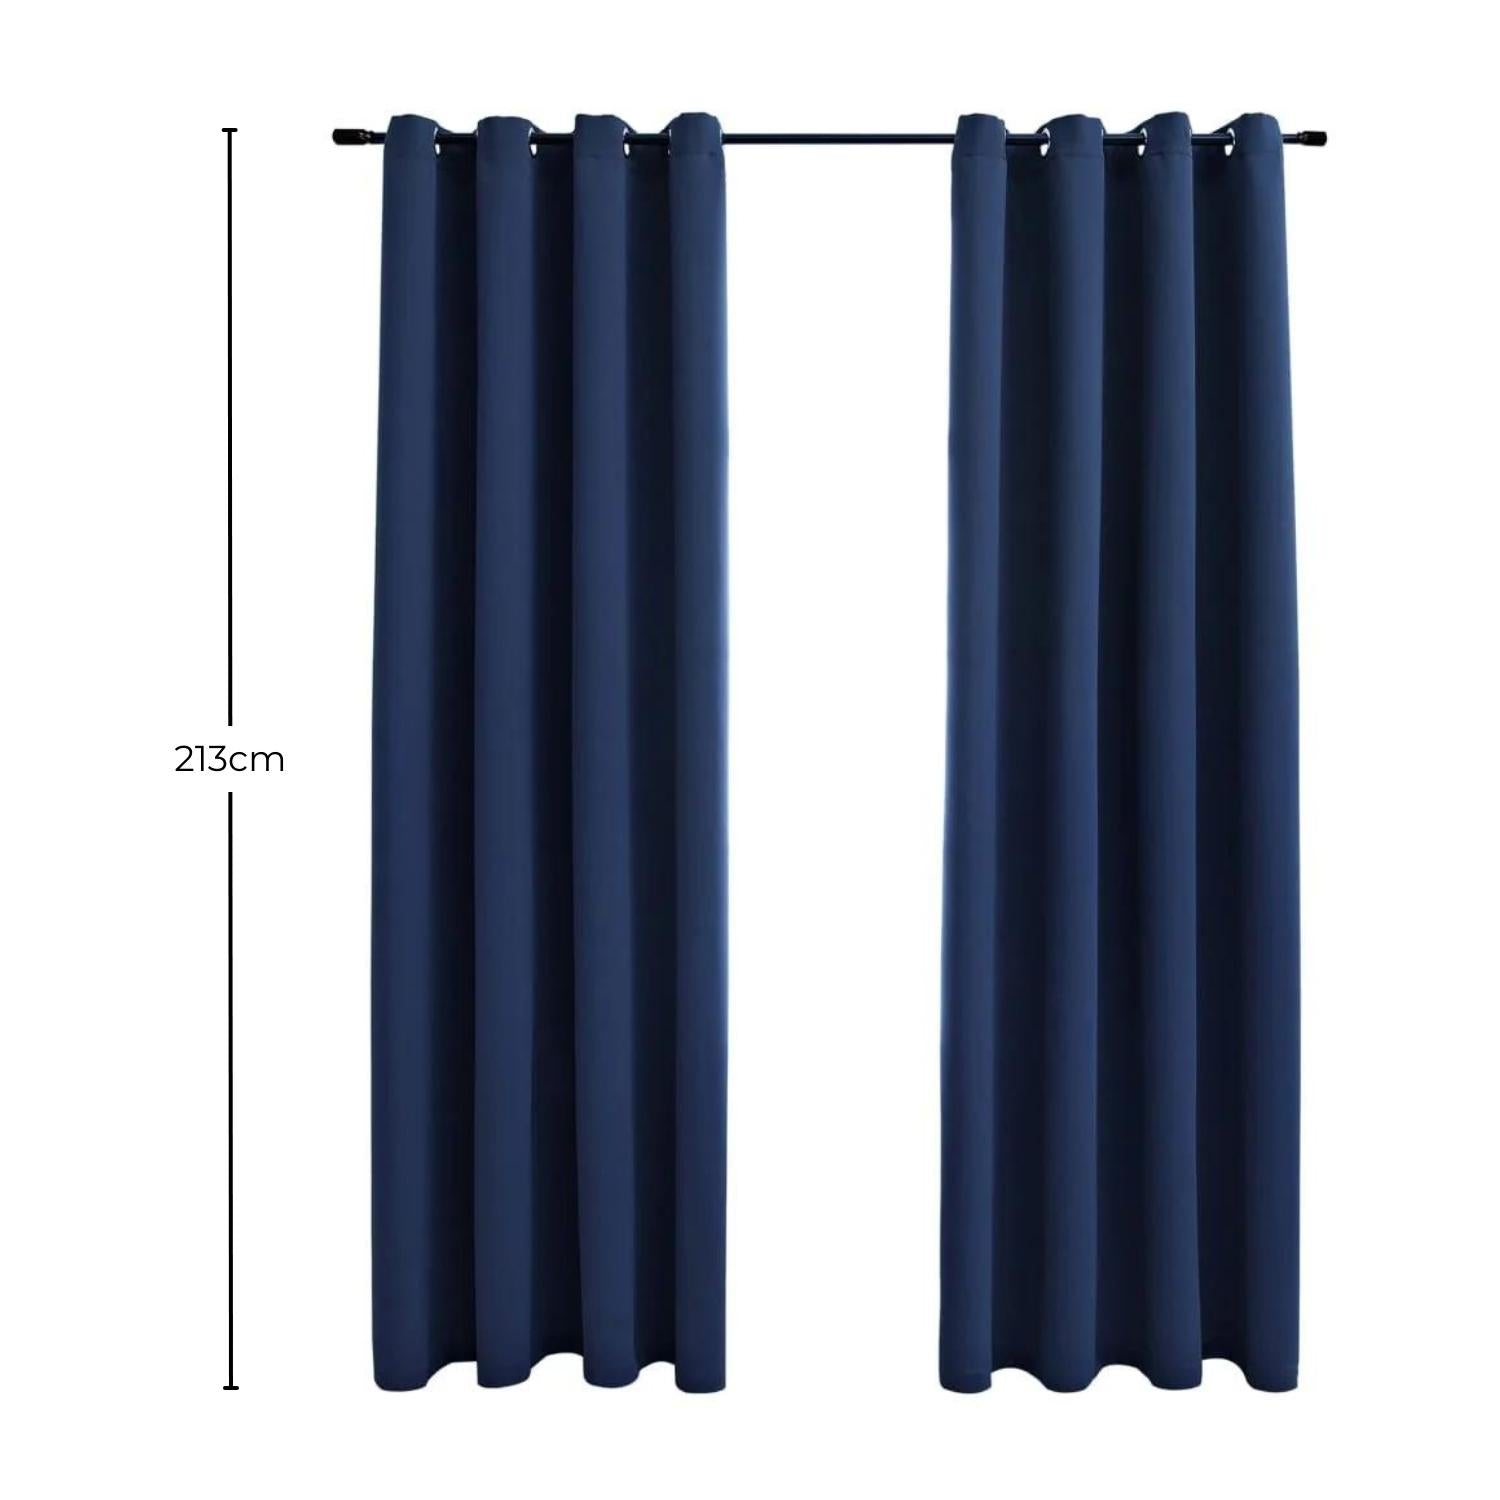 GOMINIMO Blackout Window Curtains for Thermal Insulated Room (Set of 2, W132cm x D213cm, Dark Blue) GO-CNB-105-MM - SILBERSHELL